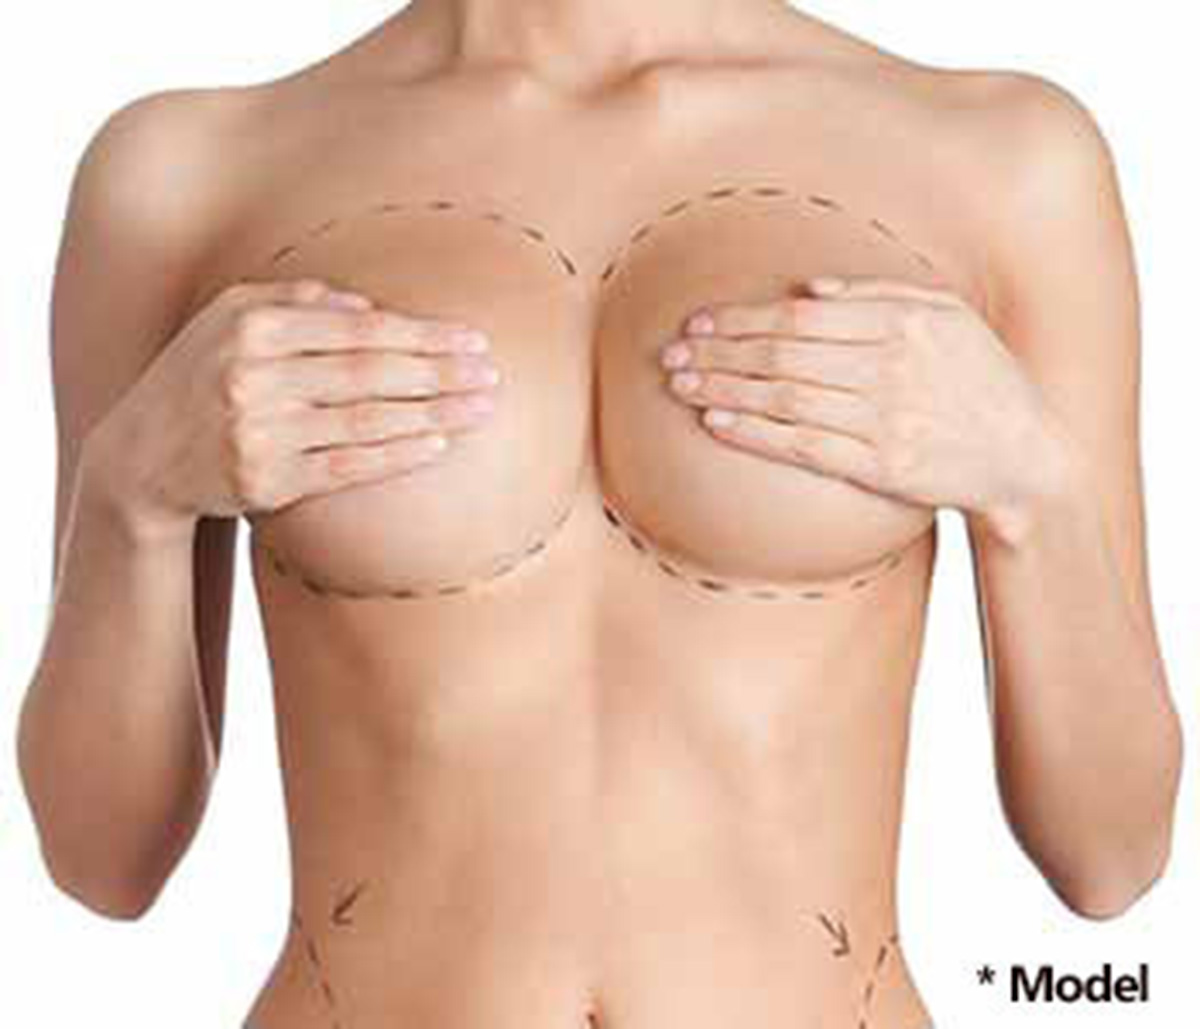 Breast Augmentation of Los Angeles - What Happens If They Rupture?